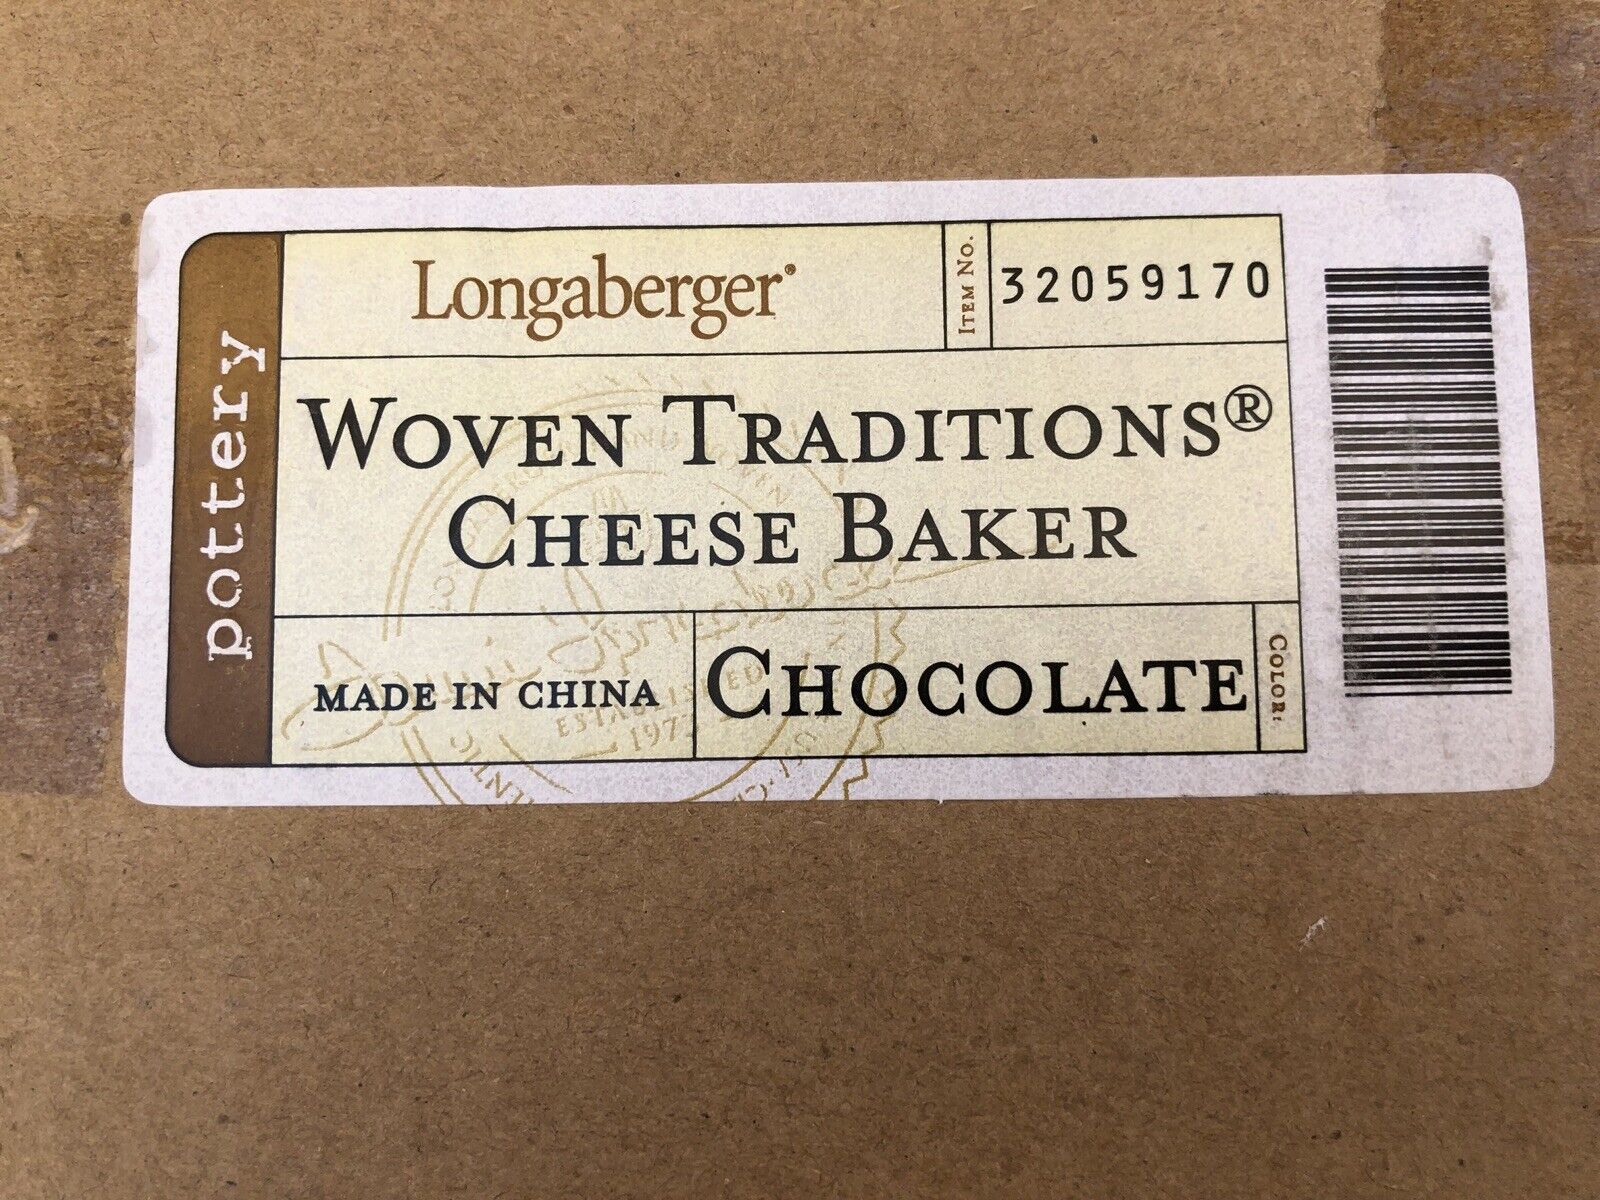 New Longaberger Pottery Woven Traditions Chocolate Brown Brie CHEESE BAKER NIB Без бренда - фотография #8